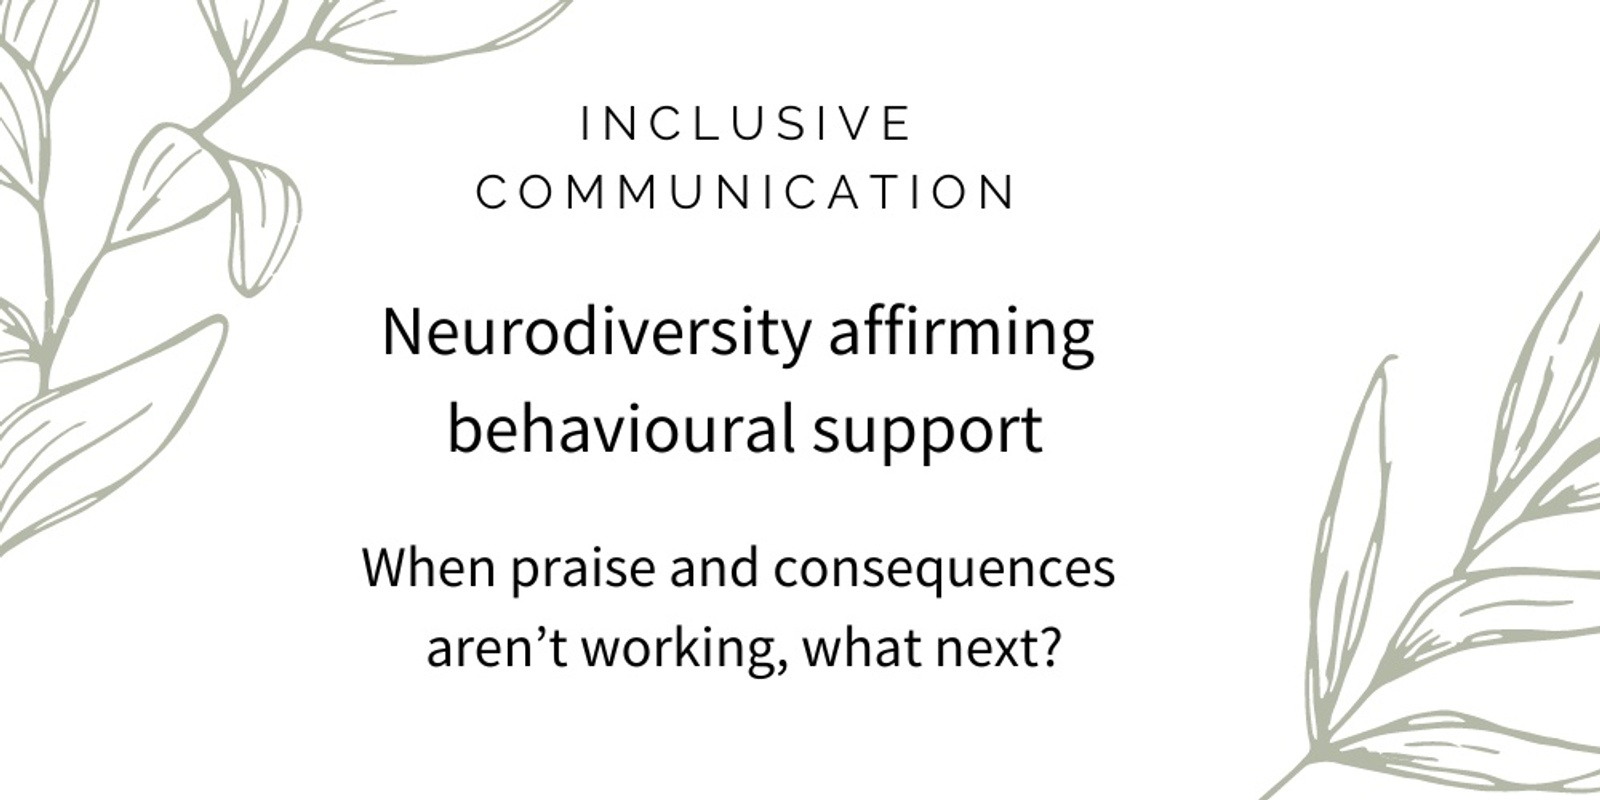 Banner image for Neurodiversity affirming behavioural support - so praise and consequences aren’t working, what next?